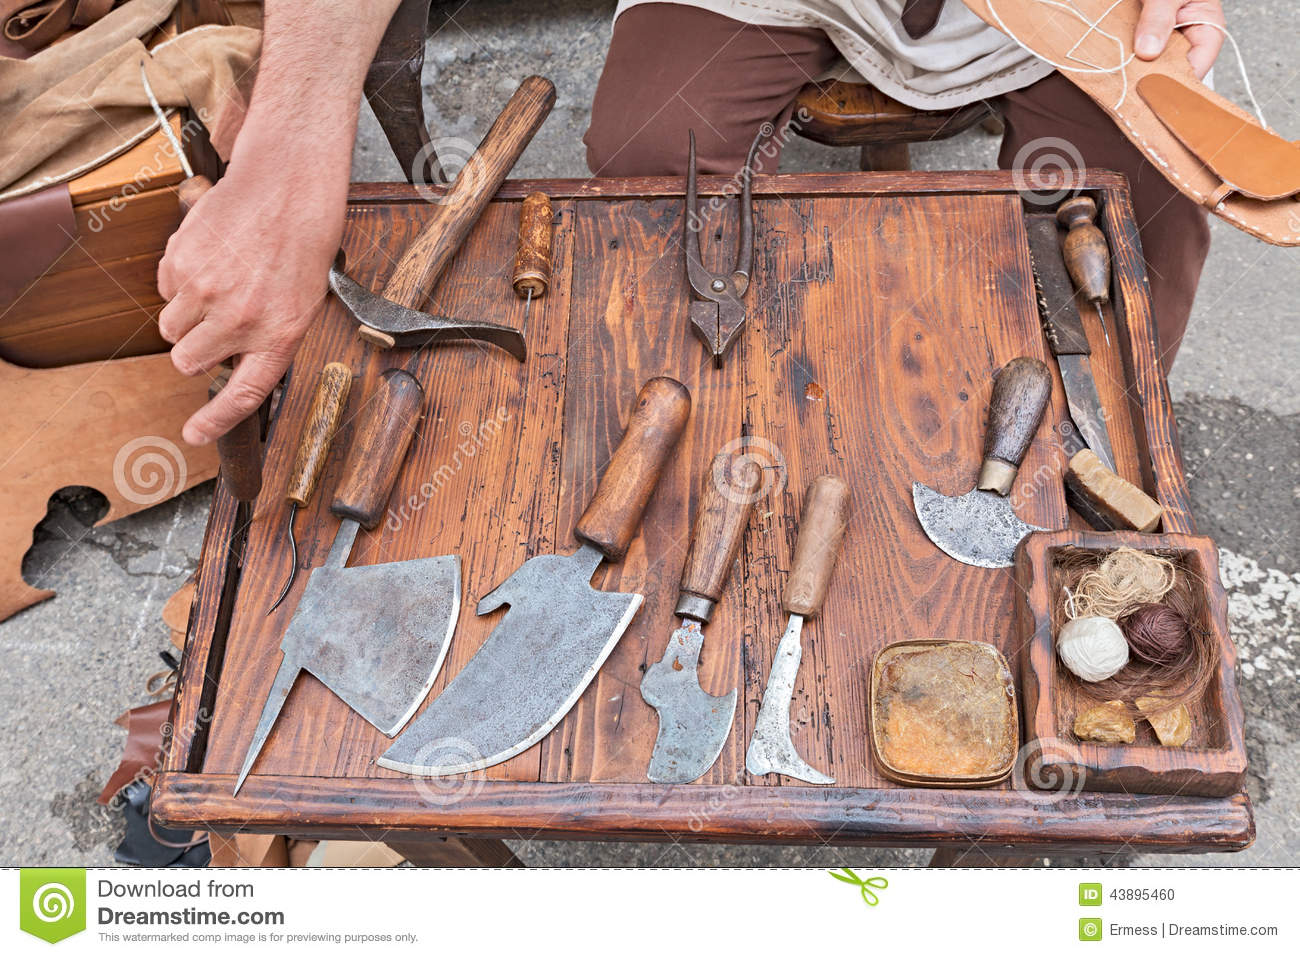 Work Table With Old Tools Of The Artisan Shoemaker For Cutting And